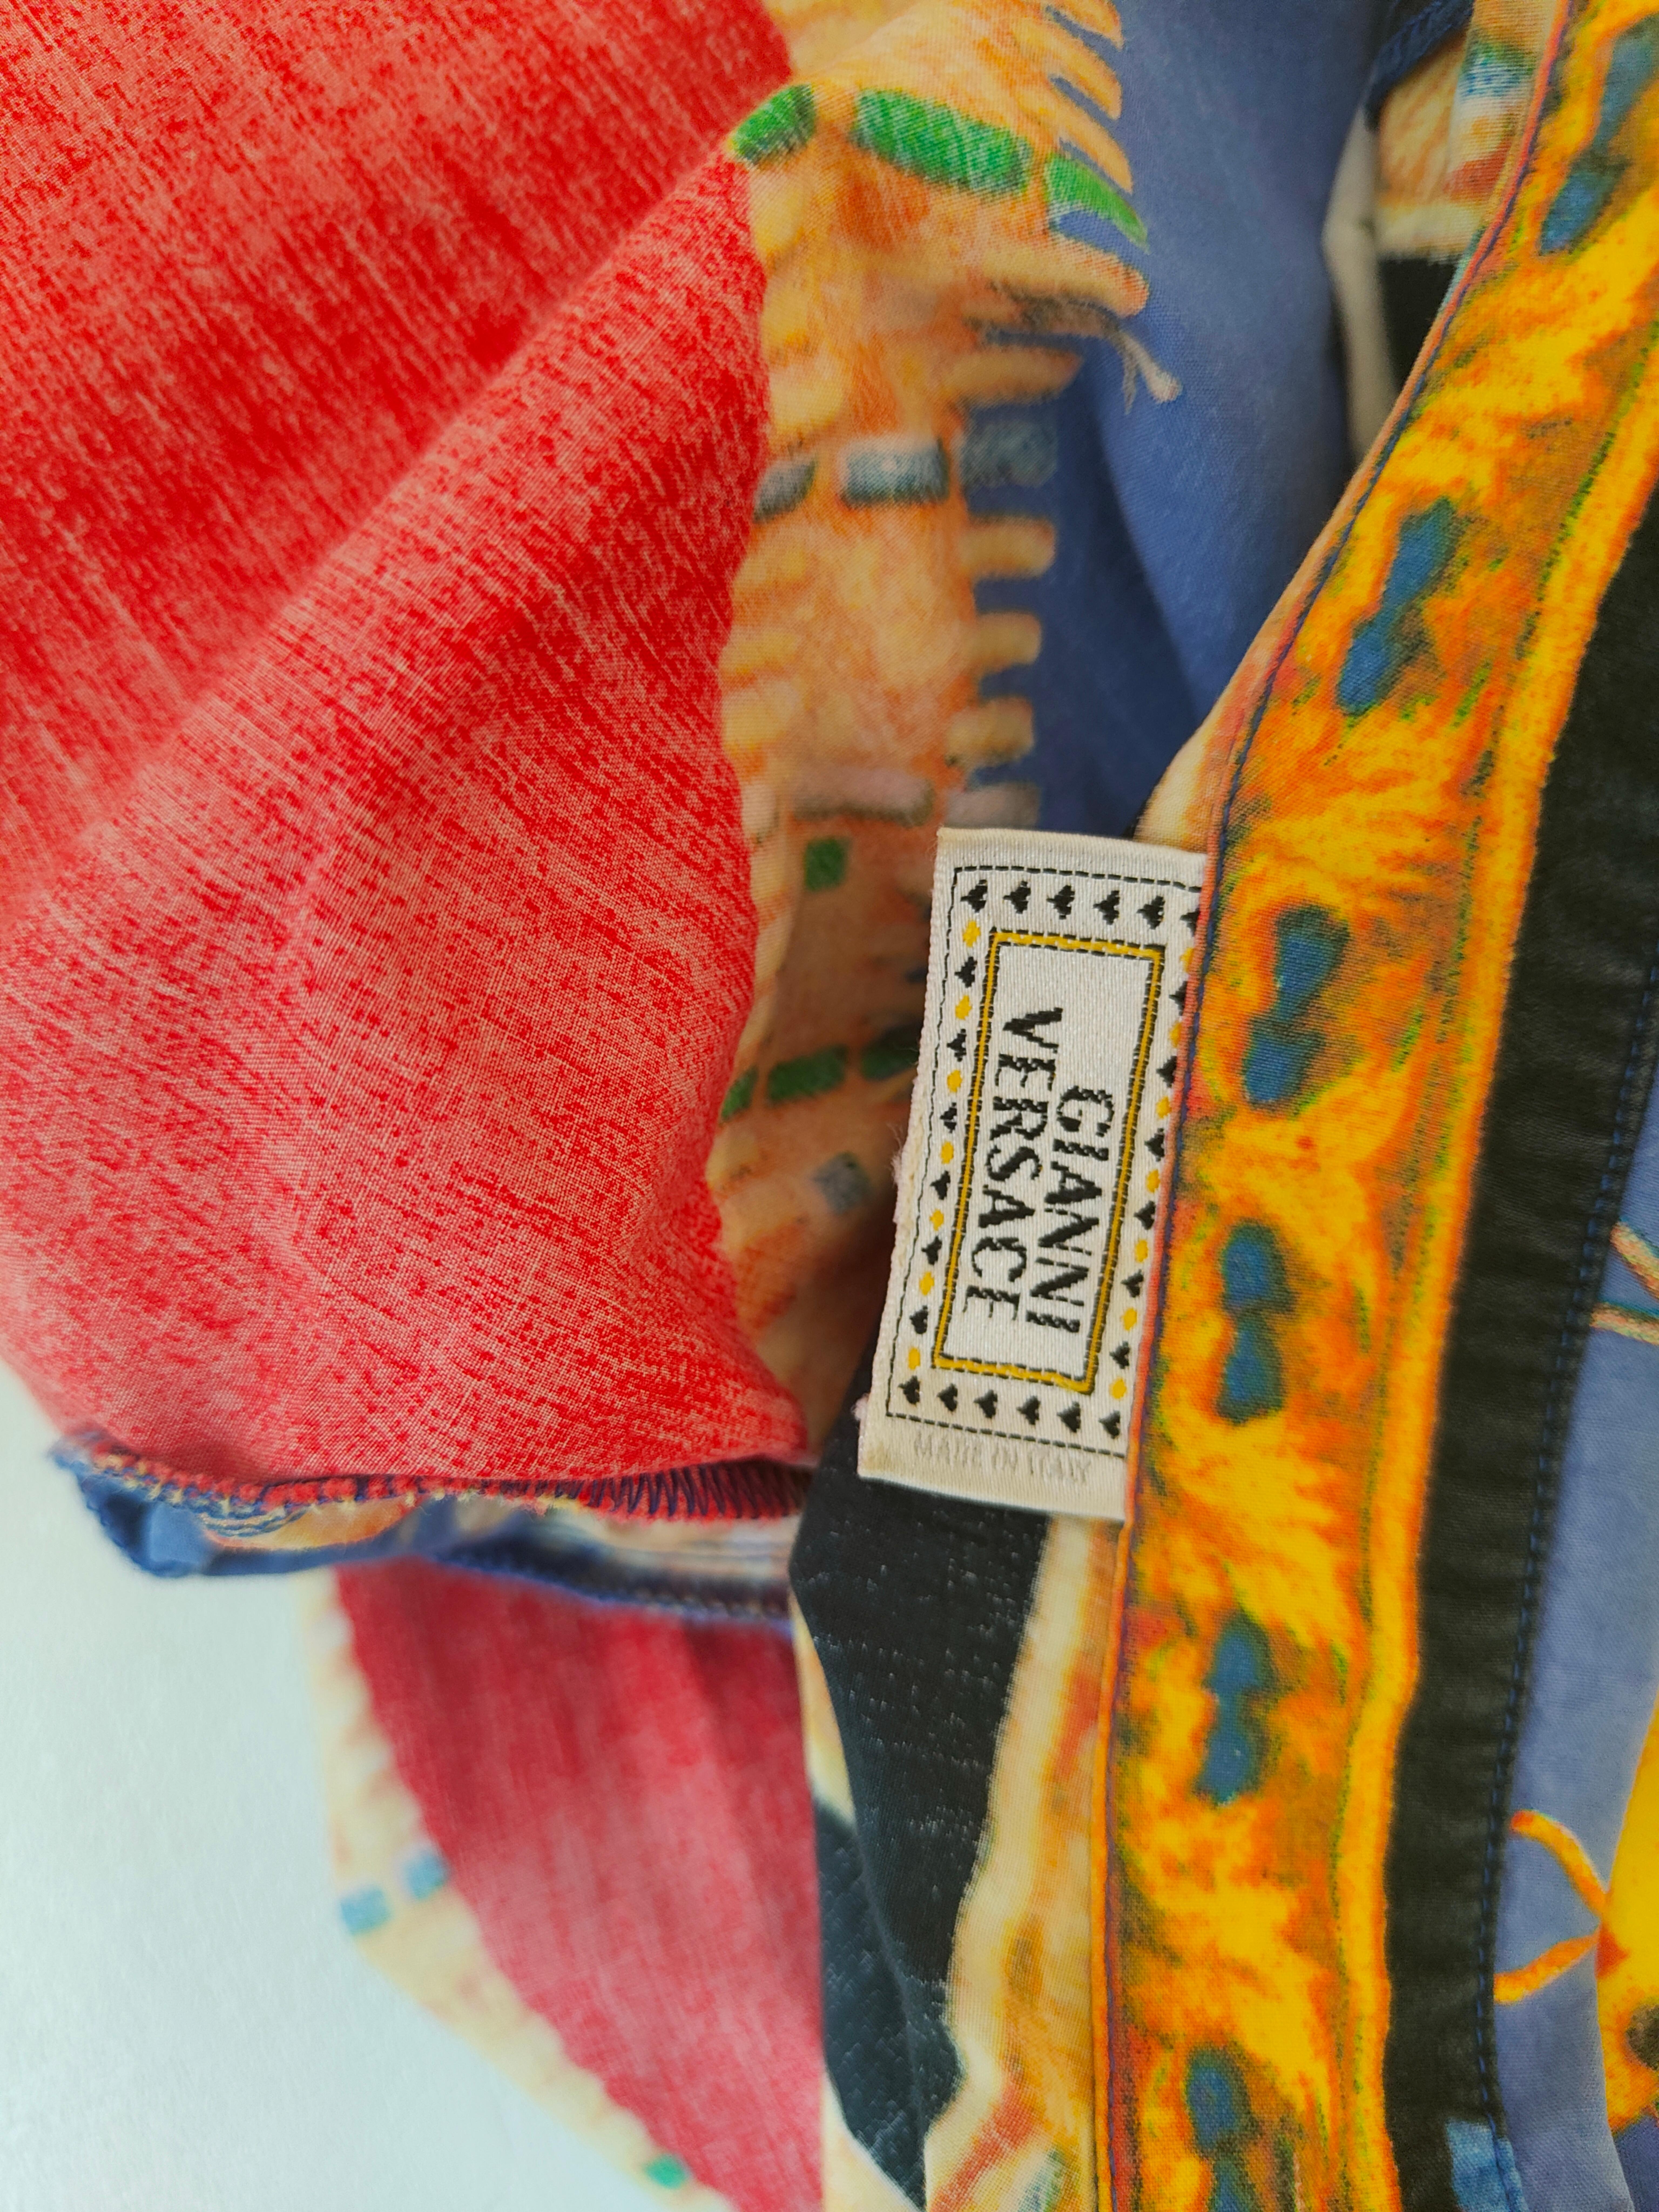 Gianni Versace iconic multicoloured cotton shirt 
Versace rare indian shirt totally made in Italy in size M